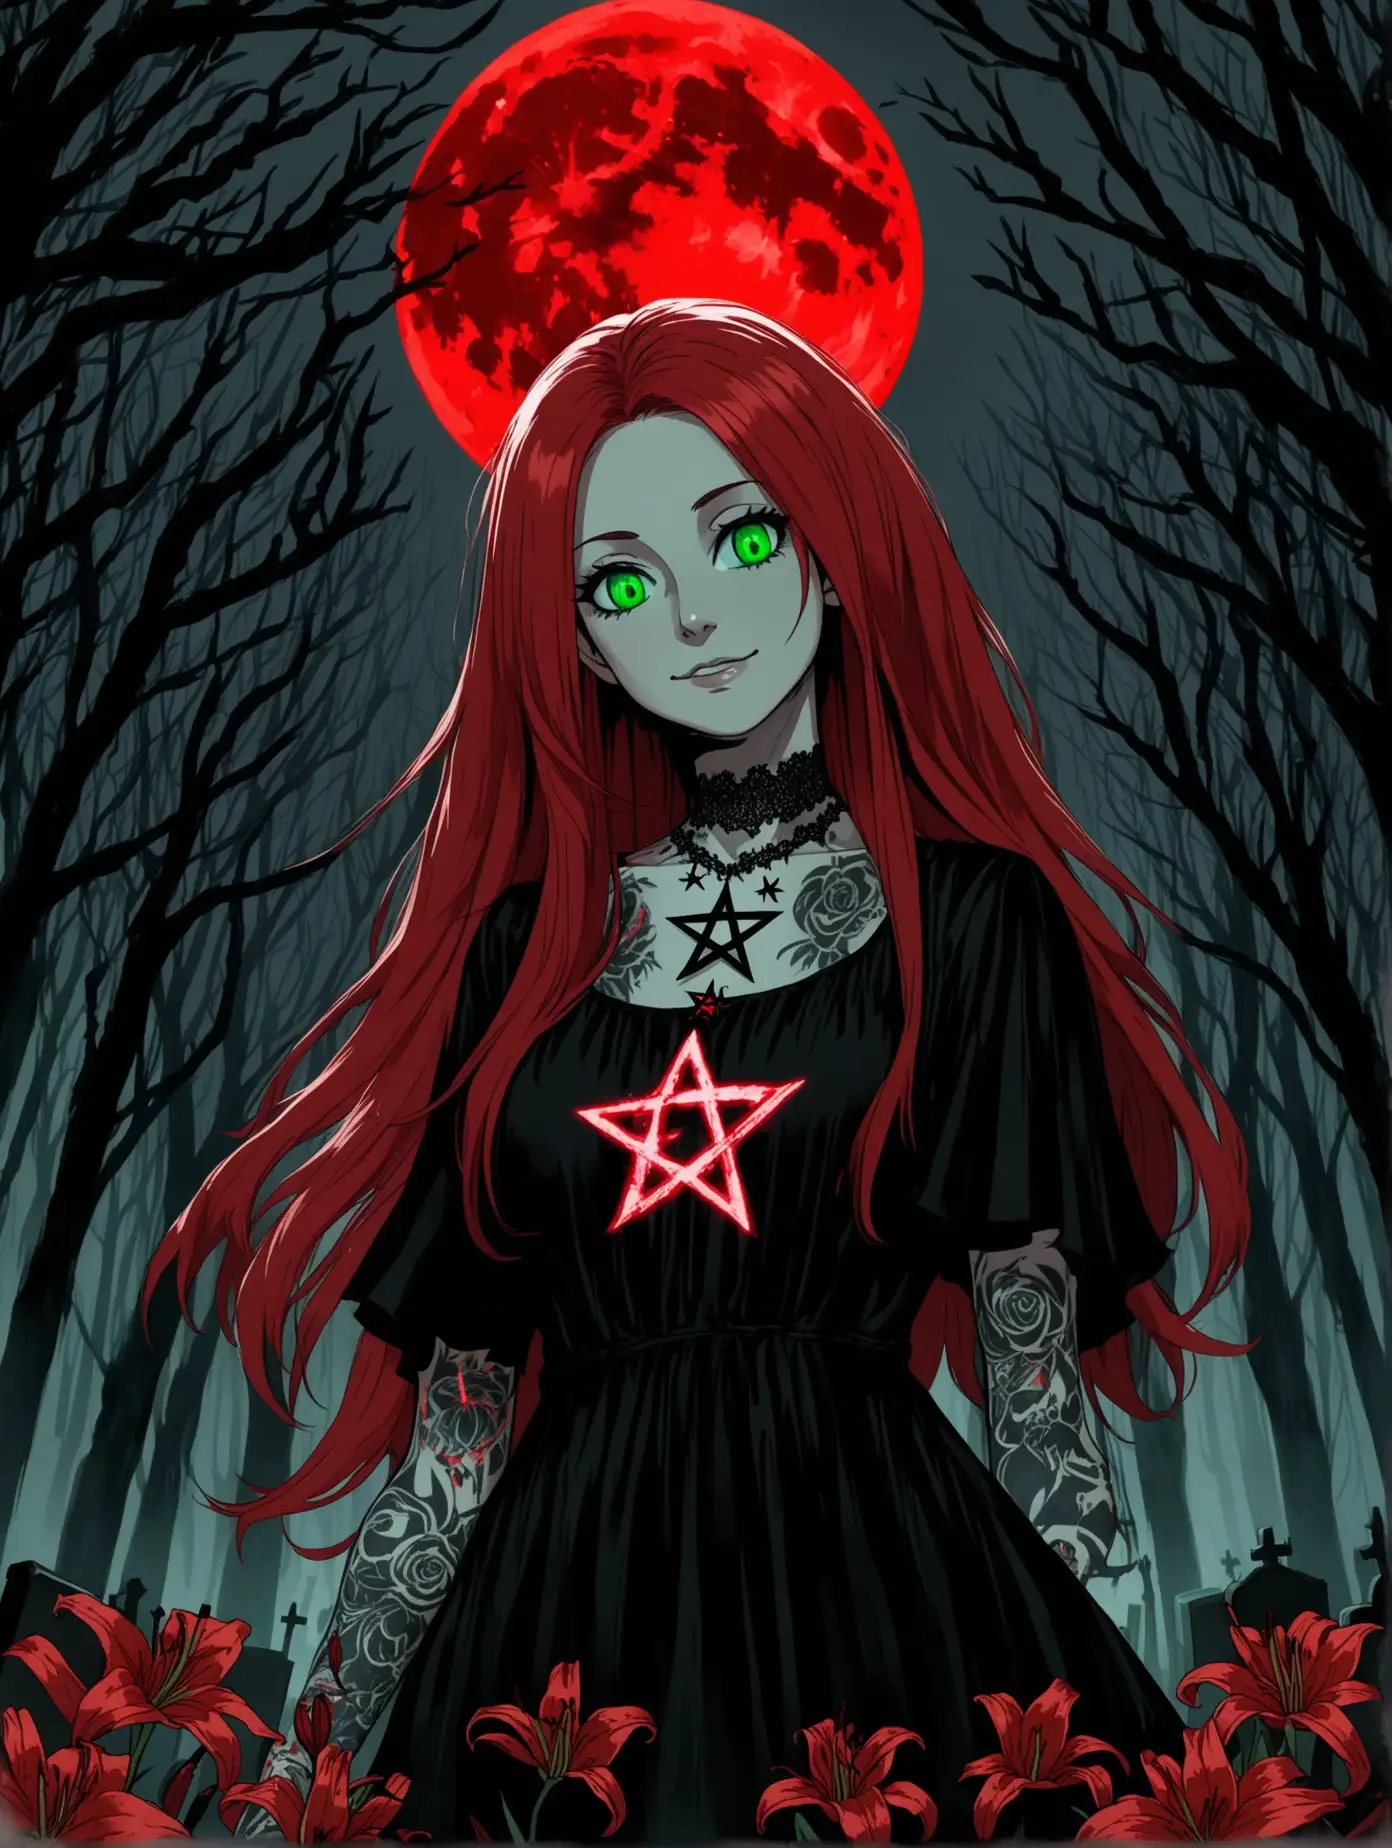 Mysterious-RedHaired-Woman-in-Gothic-Attire-Surrounded-by-Red-Lilies